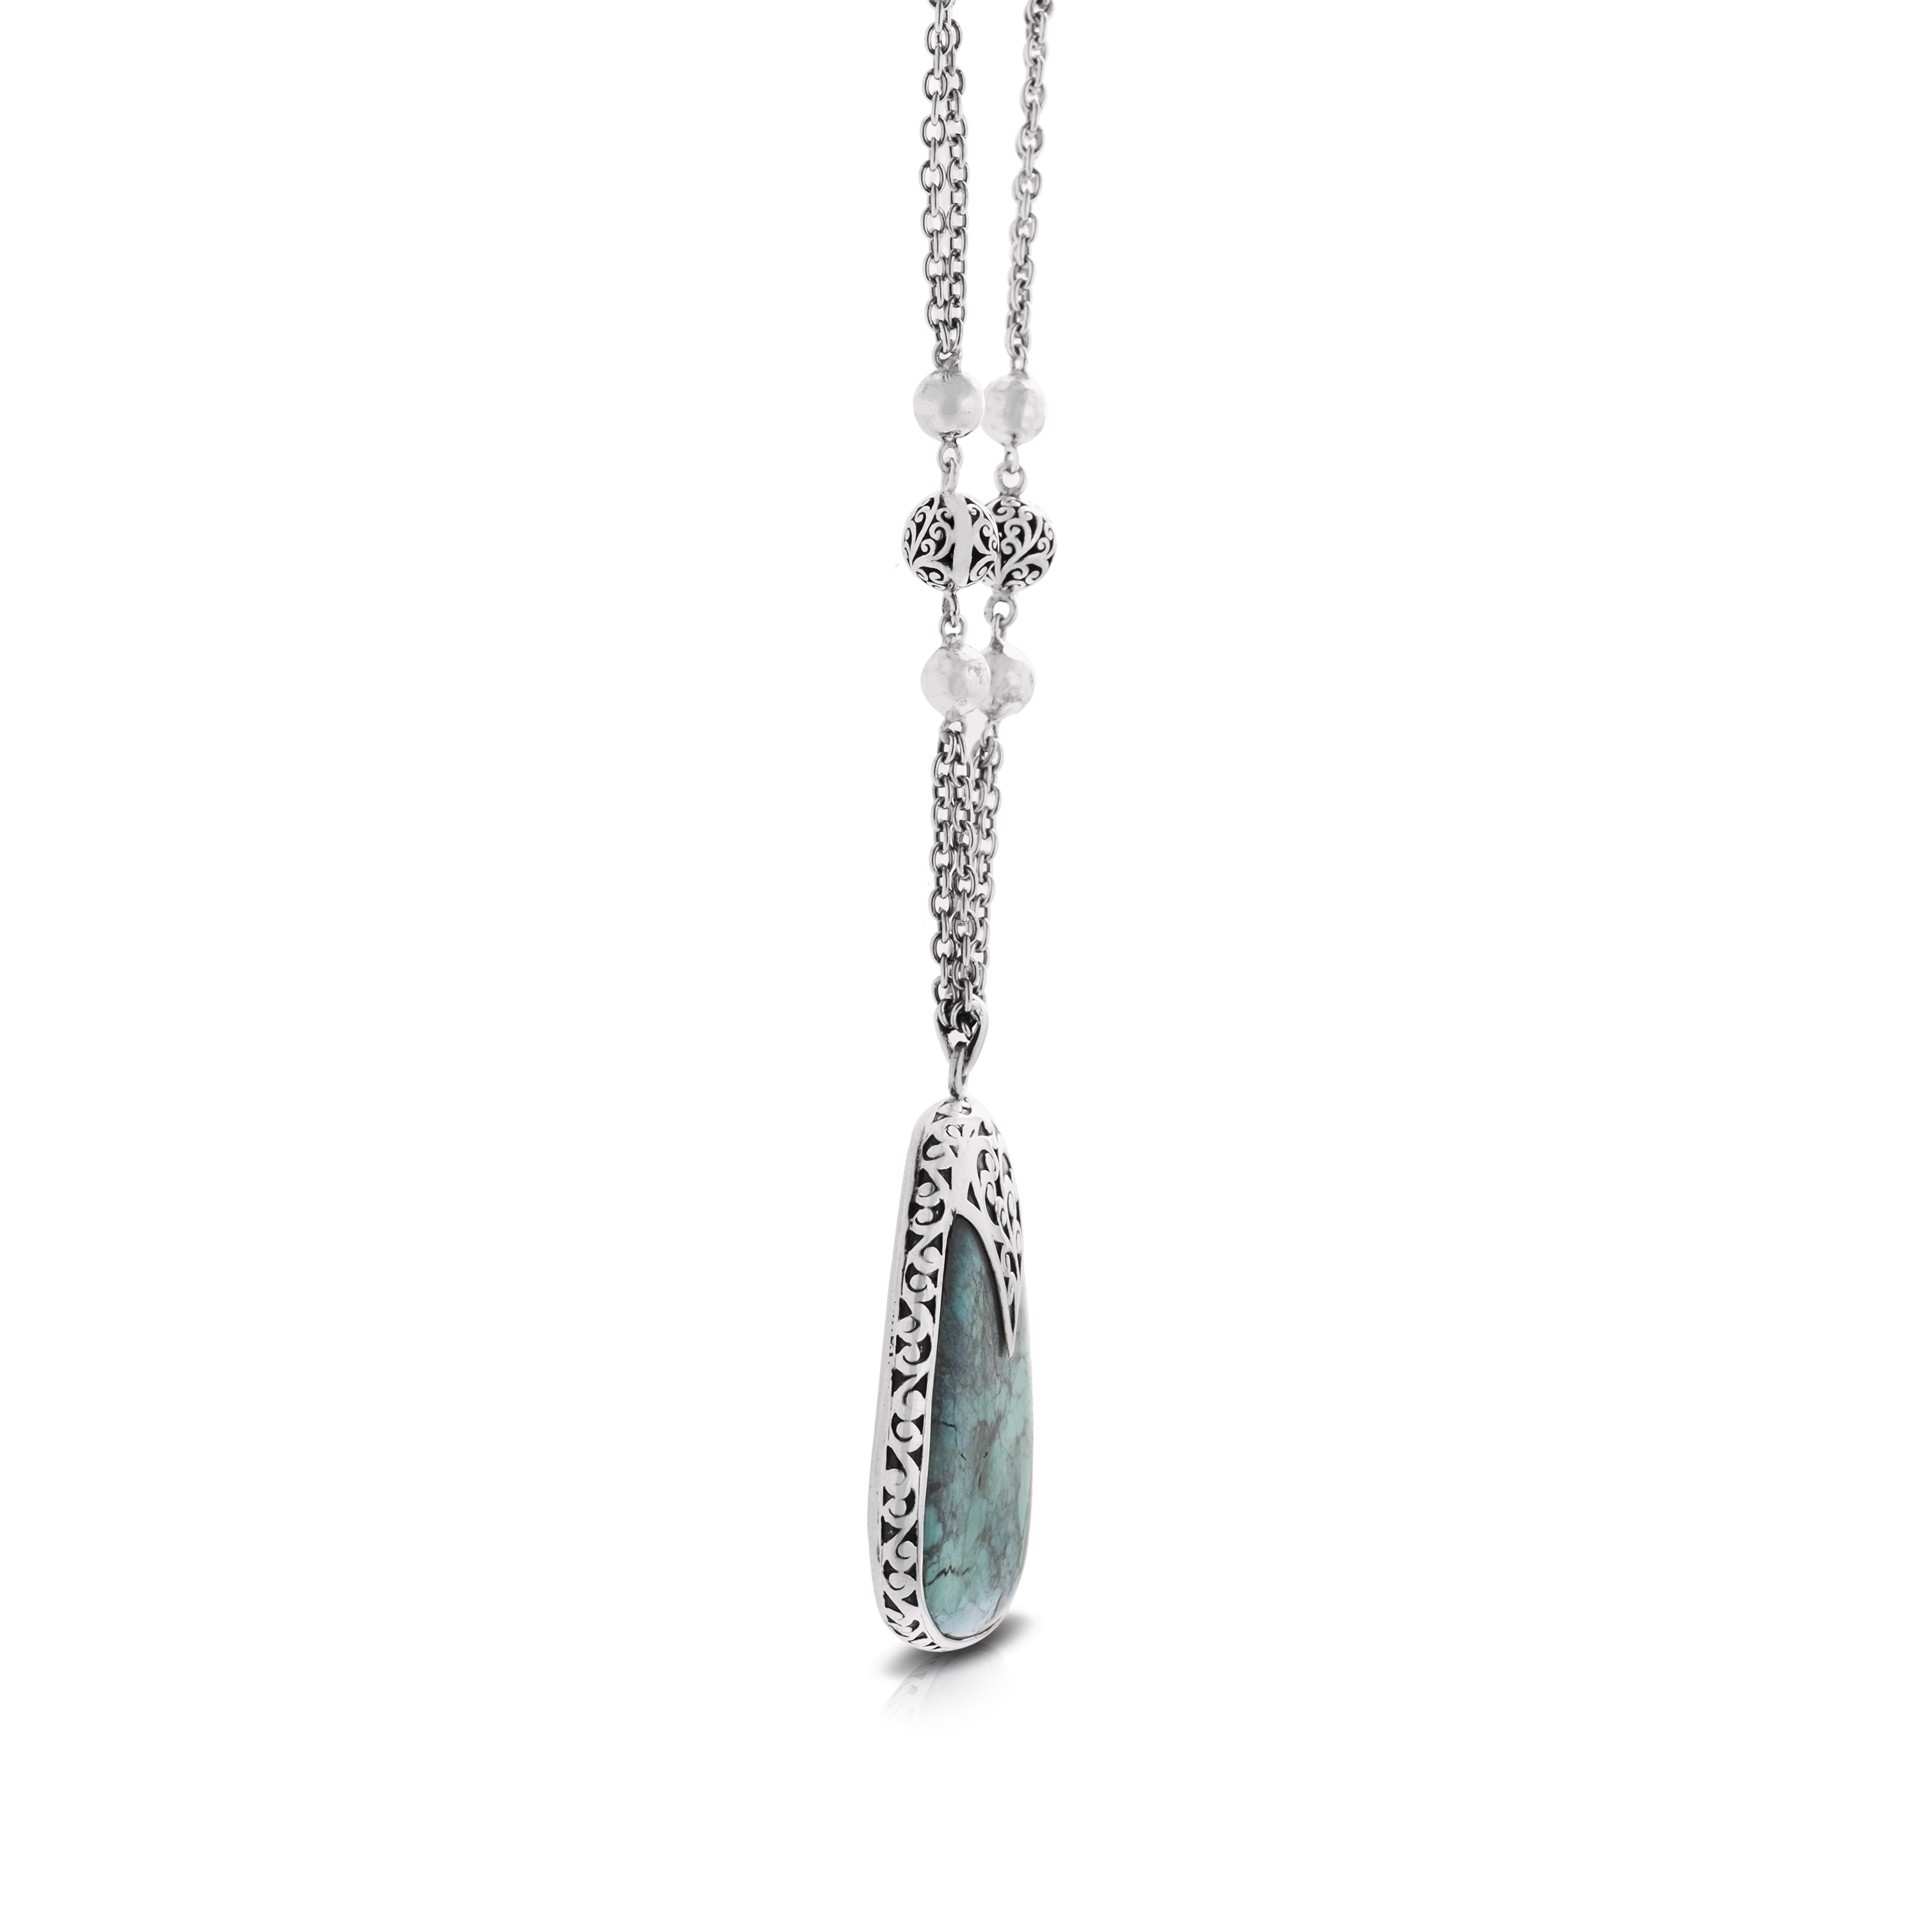 9713 Organic Shaped Turquoise with Hand Carved Scroll Back & Rim on Handmade Sterling Silver Chain, Pendant is 38 by 47mm by Lois Hill